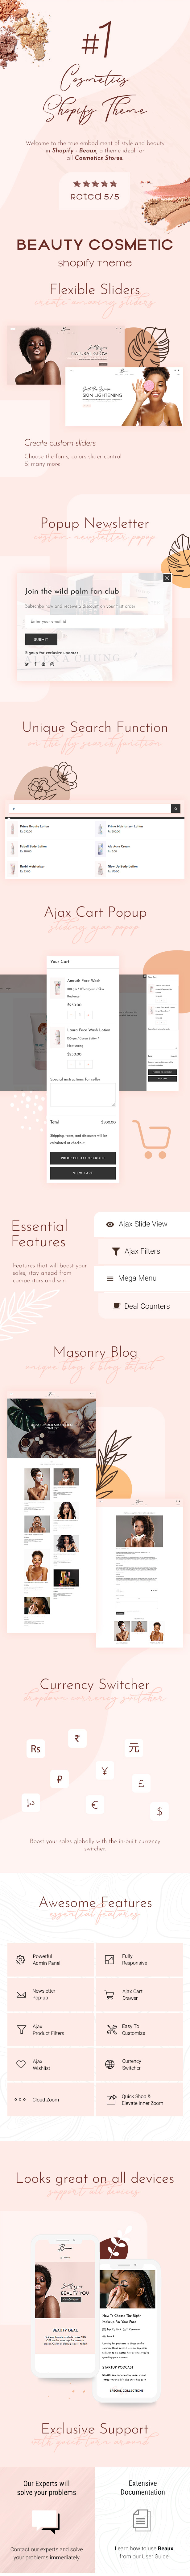 Beaux - Cosmetic Store Shopify Theme - 3